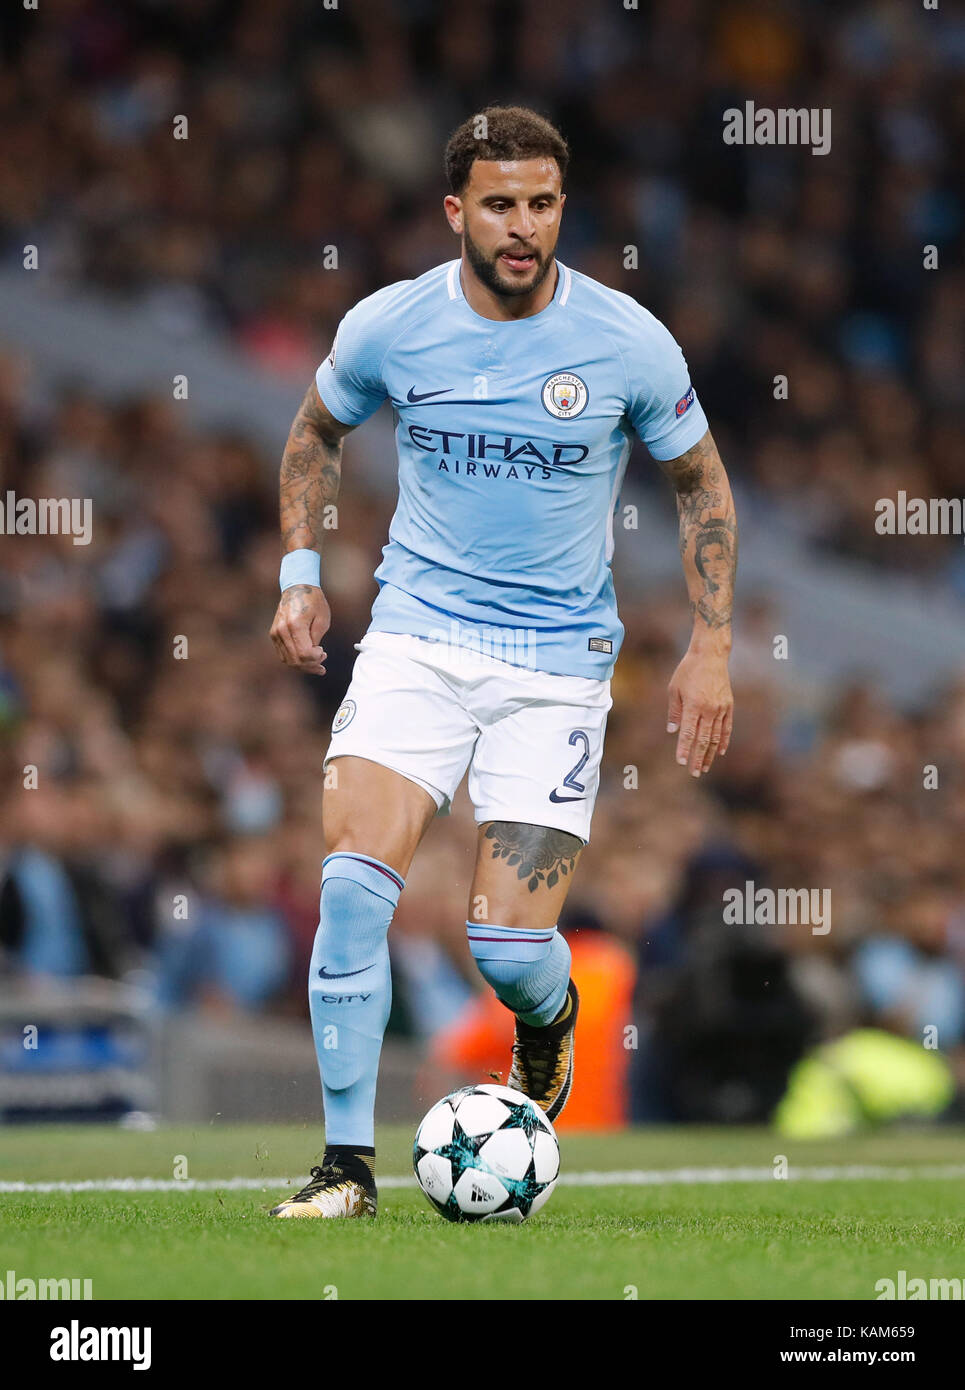 Manchester City's Kyle Walker during the UEFA Champions League, Group F match at the Etihad Stadium, Manchester. PRESS ASSOCIATION Photo. Picture date: Tuesday September 26, 2017. See PA story soccer Man City. Photo credit should read: Martin Rickett/PA Wire Stock Photo